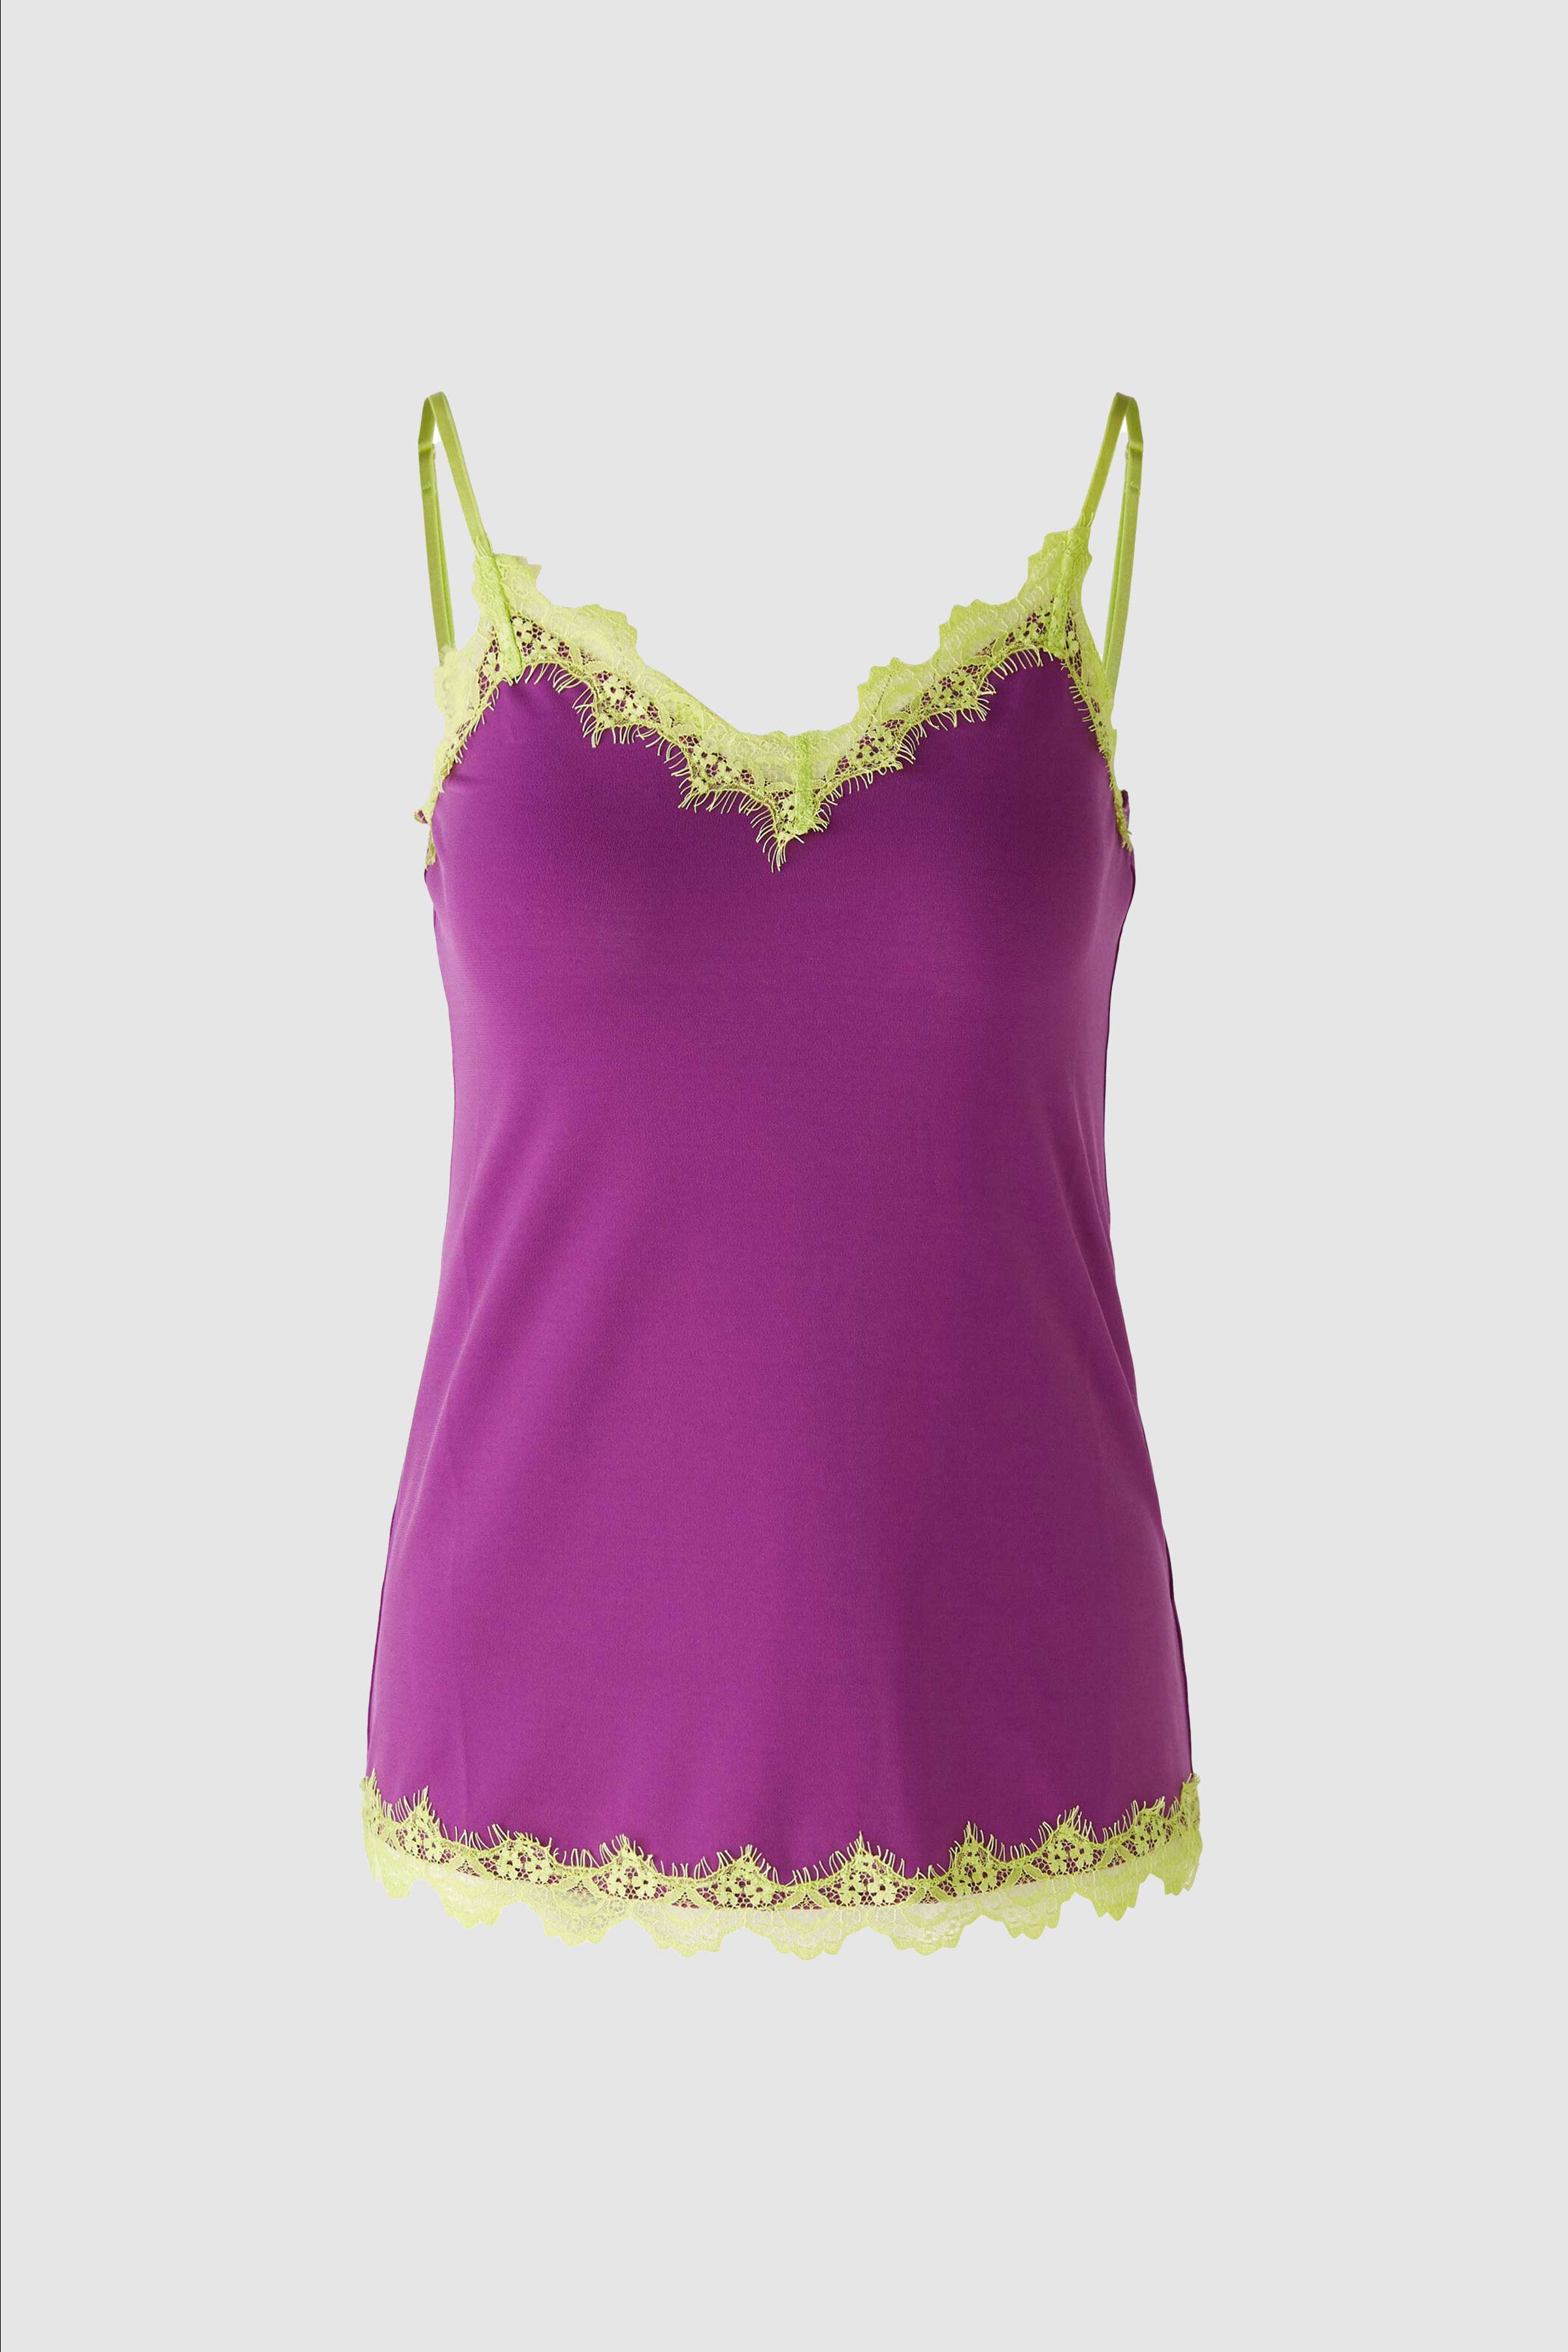 Jersey Lace Top in Sparkling Grape